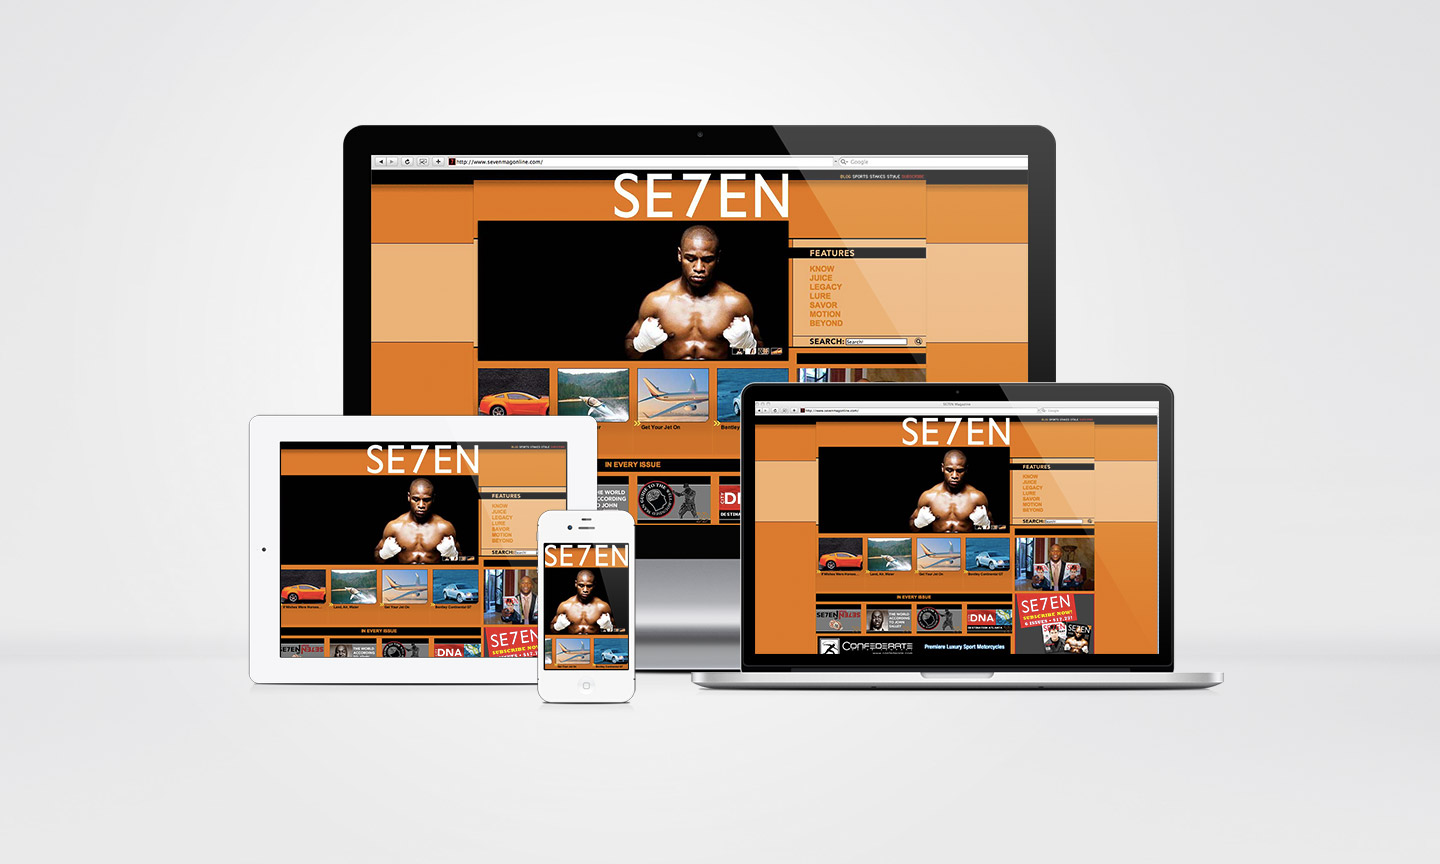 Four devices of differing sizes displaying the orange and black SE7EN website